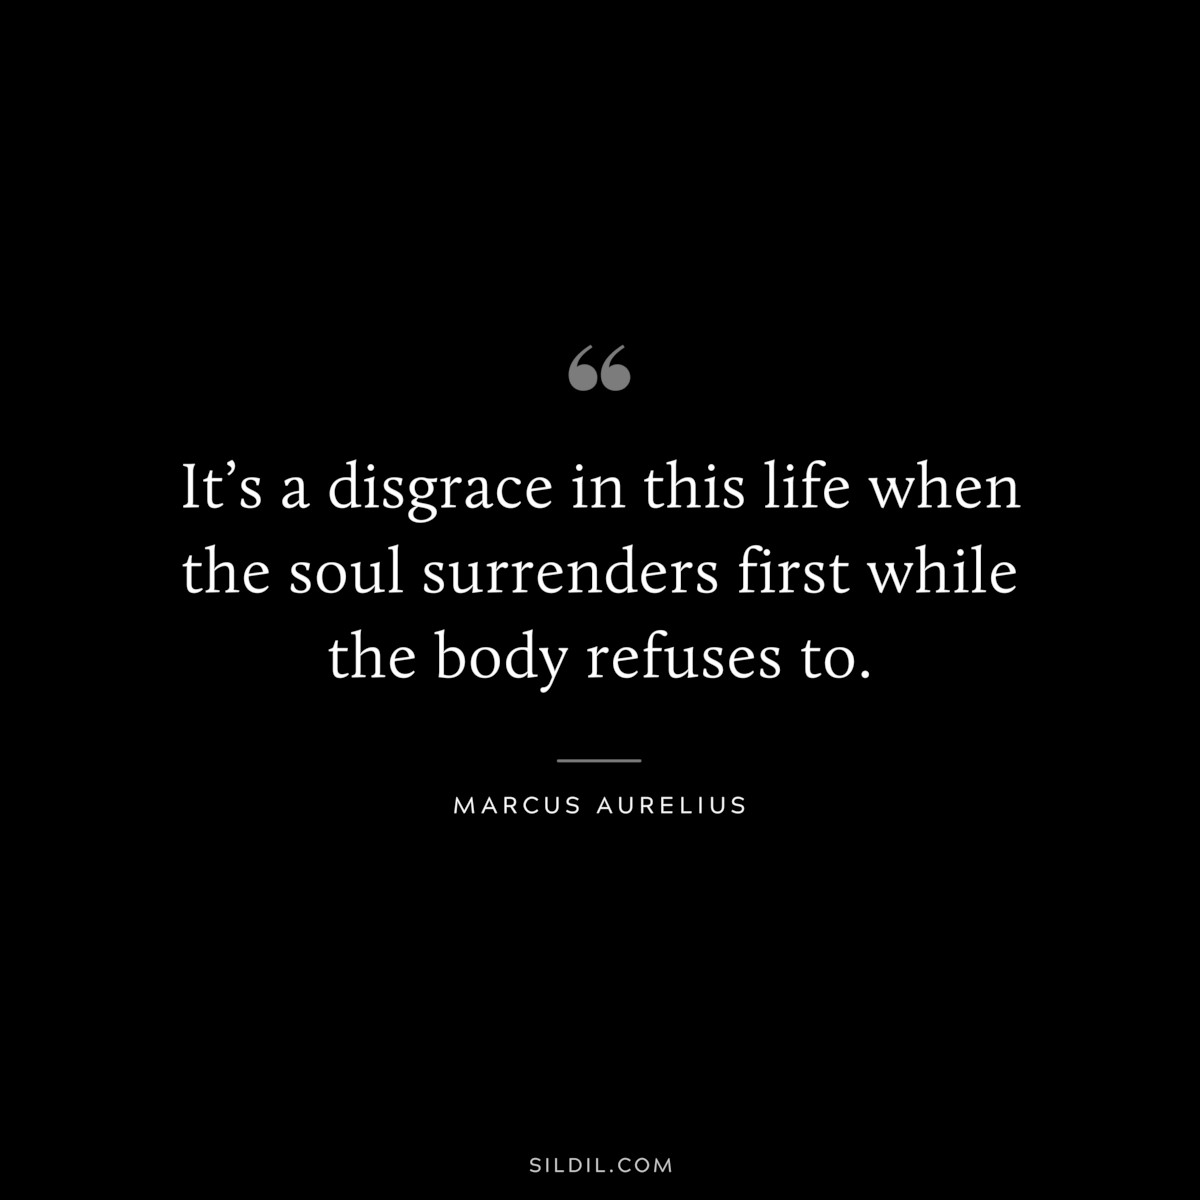 It’s a disgrace in this life when the soul surrenders first while the body refuses to. ― Marcus Aurelius